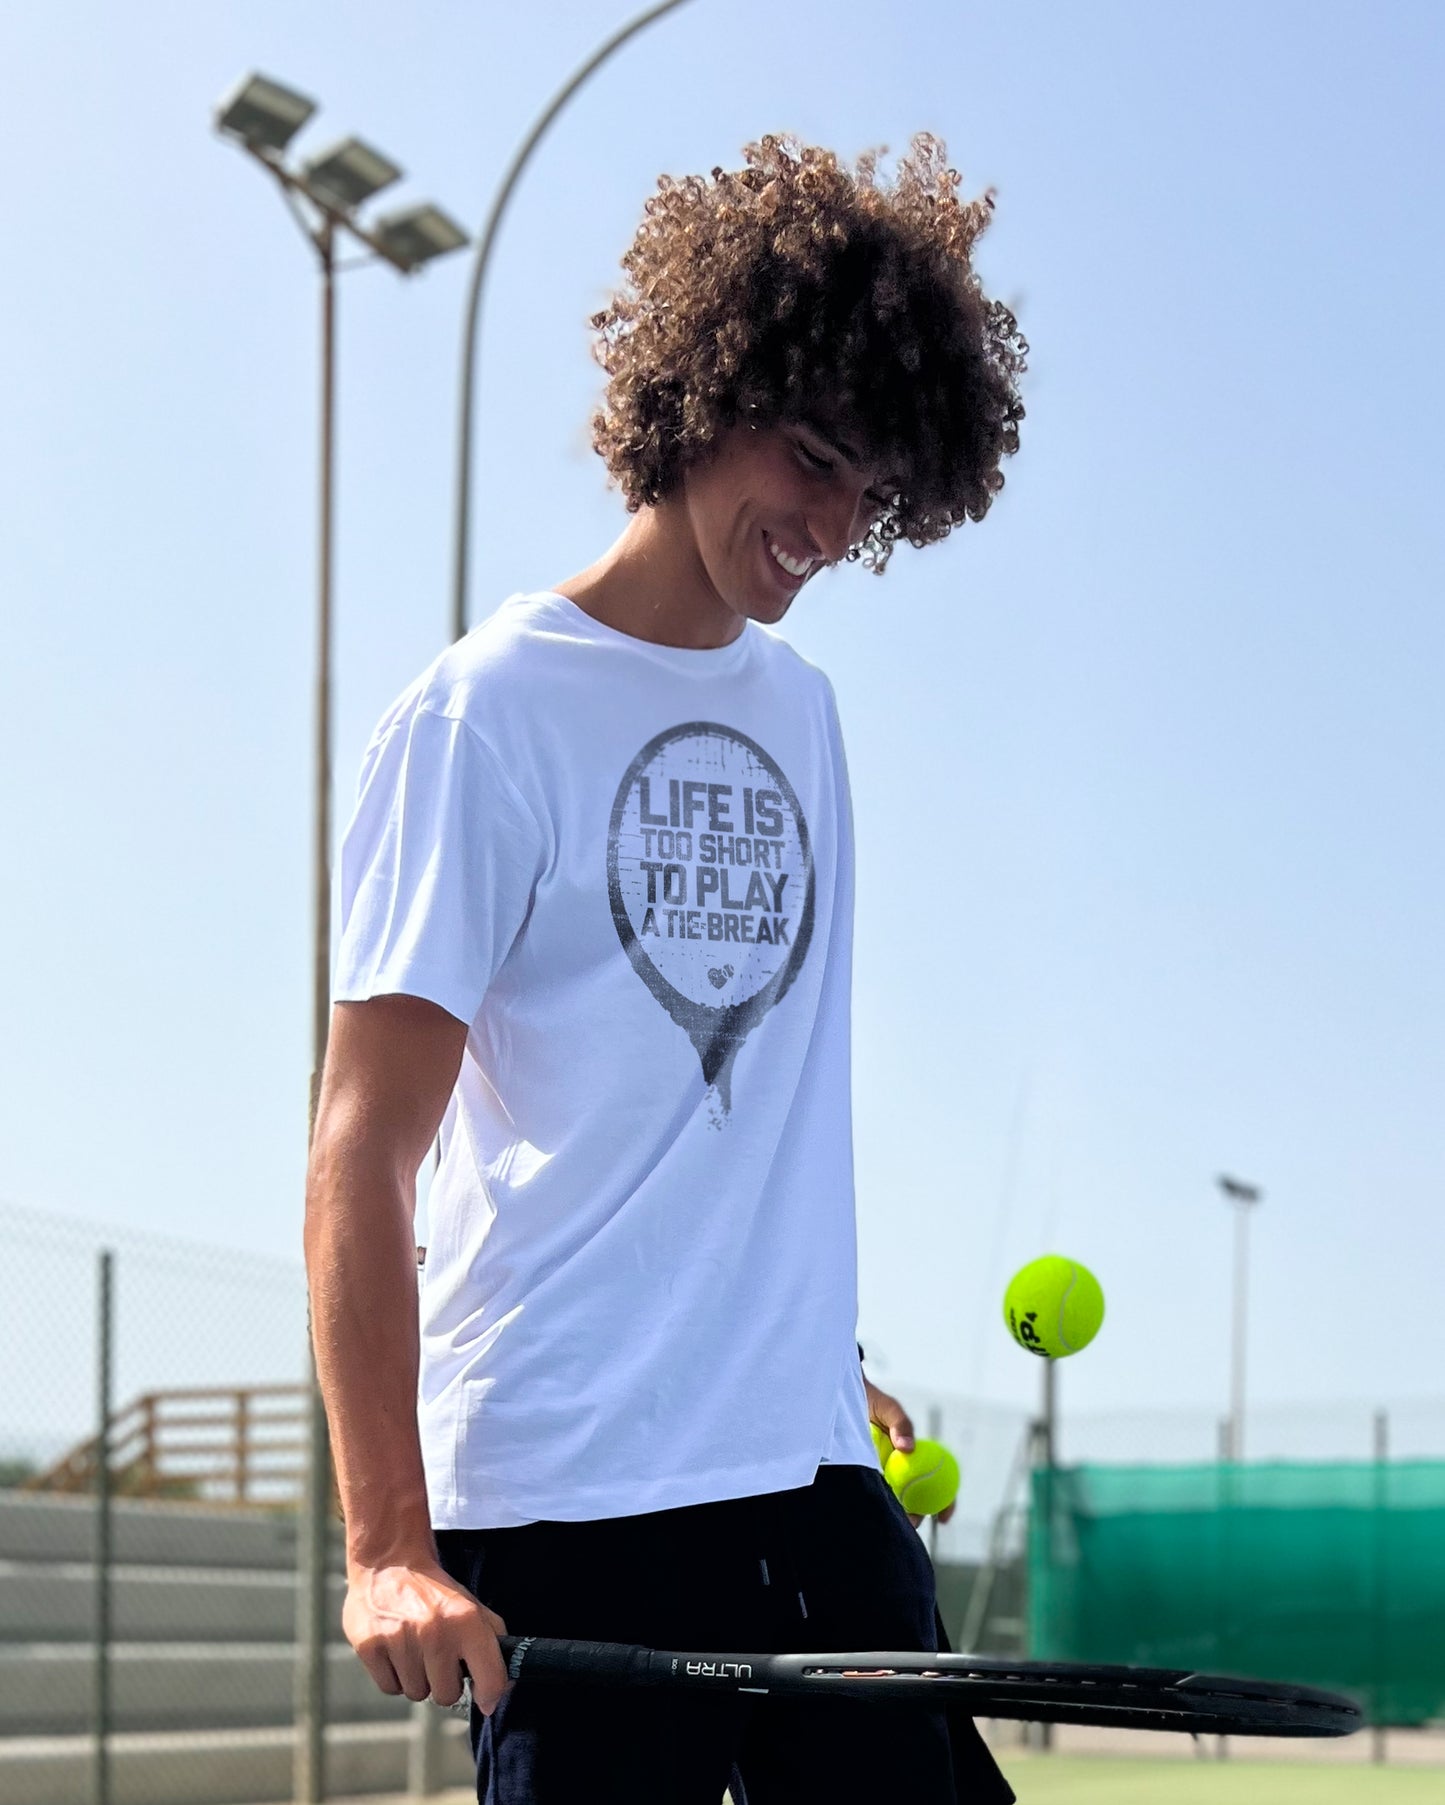 #Tennis in My Soul Life is too short…